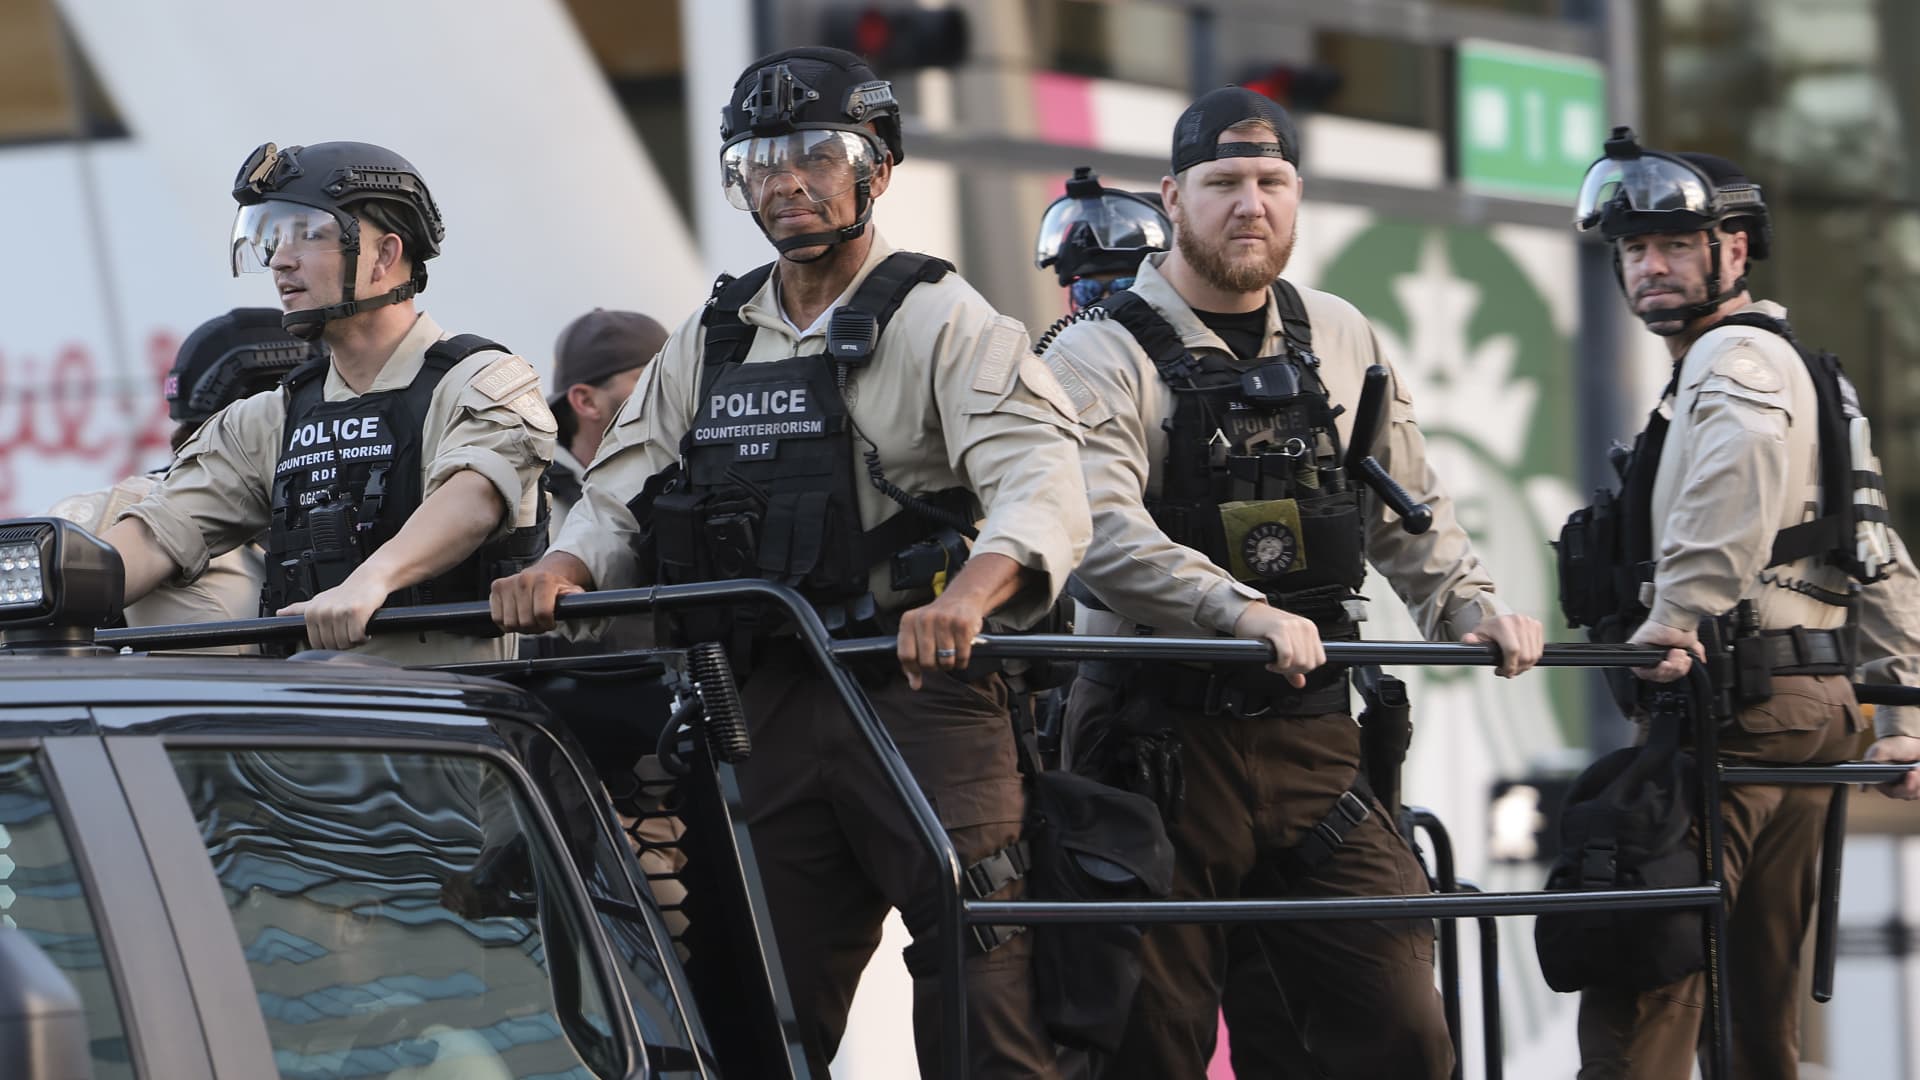 MIAMI, FLORIDA - JUNE 13: Members of law enforcement wearing riot gear ride past the Wilkie D. Ferguson, Jr. U.S. Courthouse on June 13, 2023 in Miami, Florida. Republican presidential candidate former U.S. President Donald Trump is scheduled to appear today for his arraignment on charges including possession of national security documents after leaving office, obstruction, and making false statements. (Photo by Win McNamee/Getty Images)